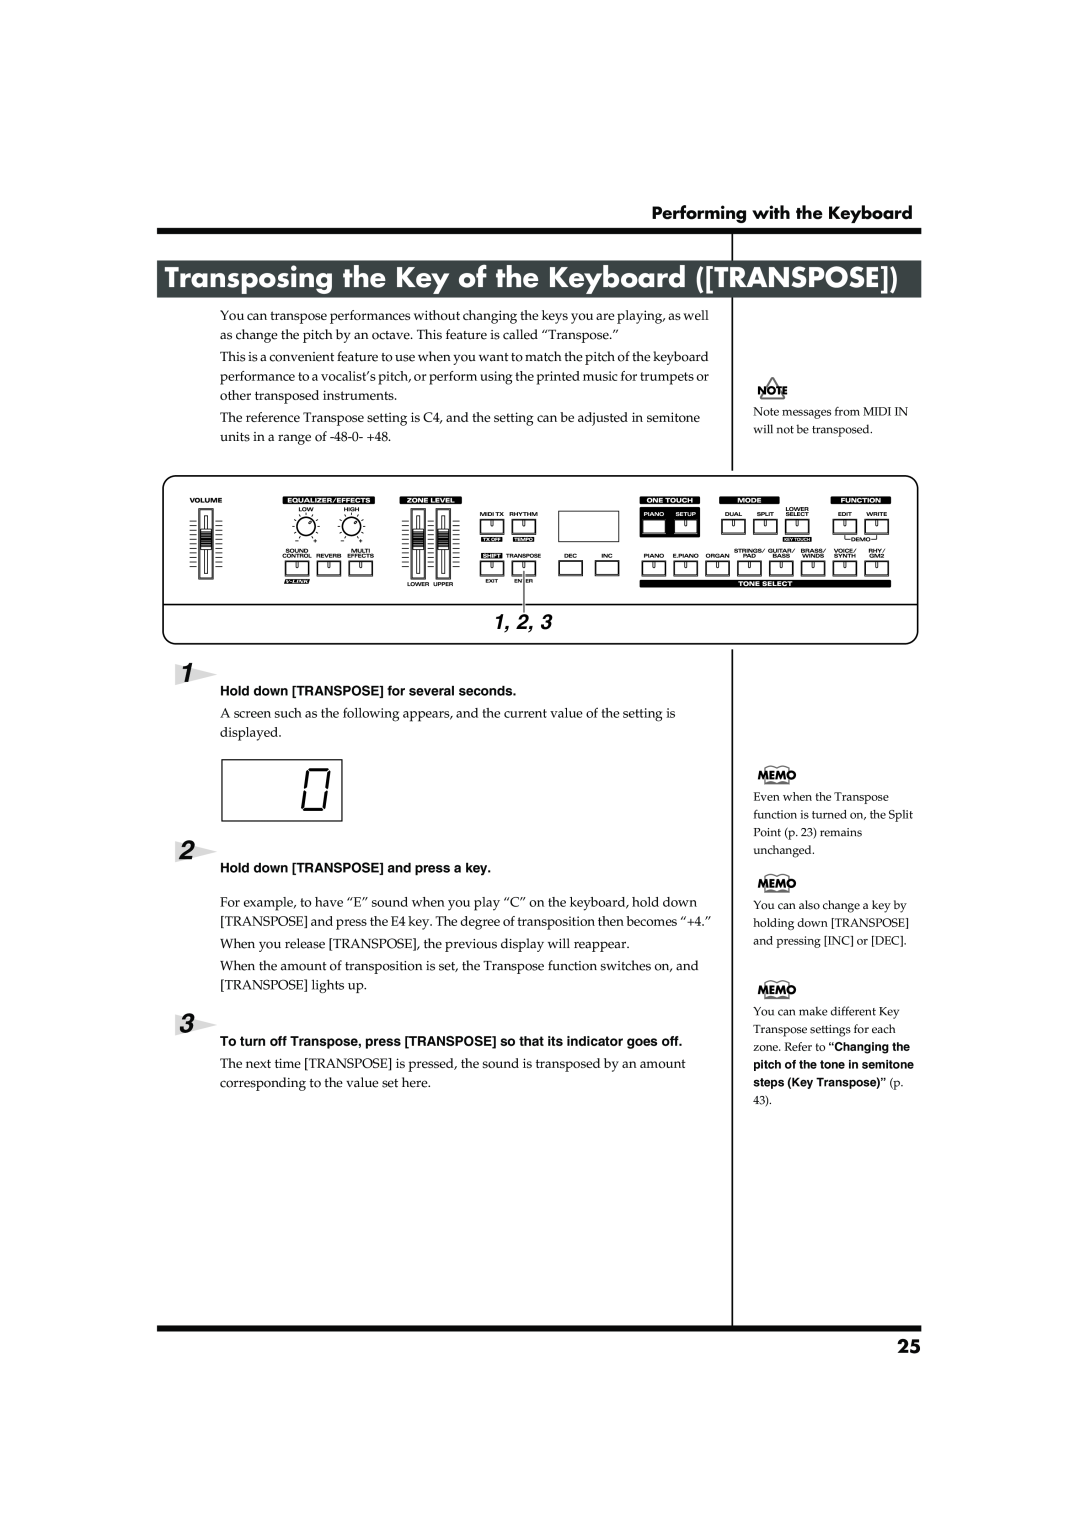 Roland RD-300SX owner manual Transposing the Key of the Keyboard TRANSPOSE, 1, 2, Performing with the Keyboard 